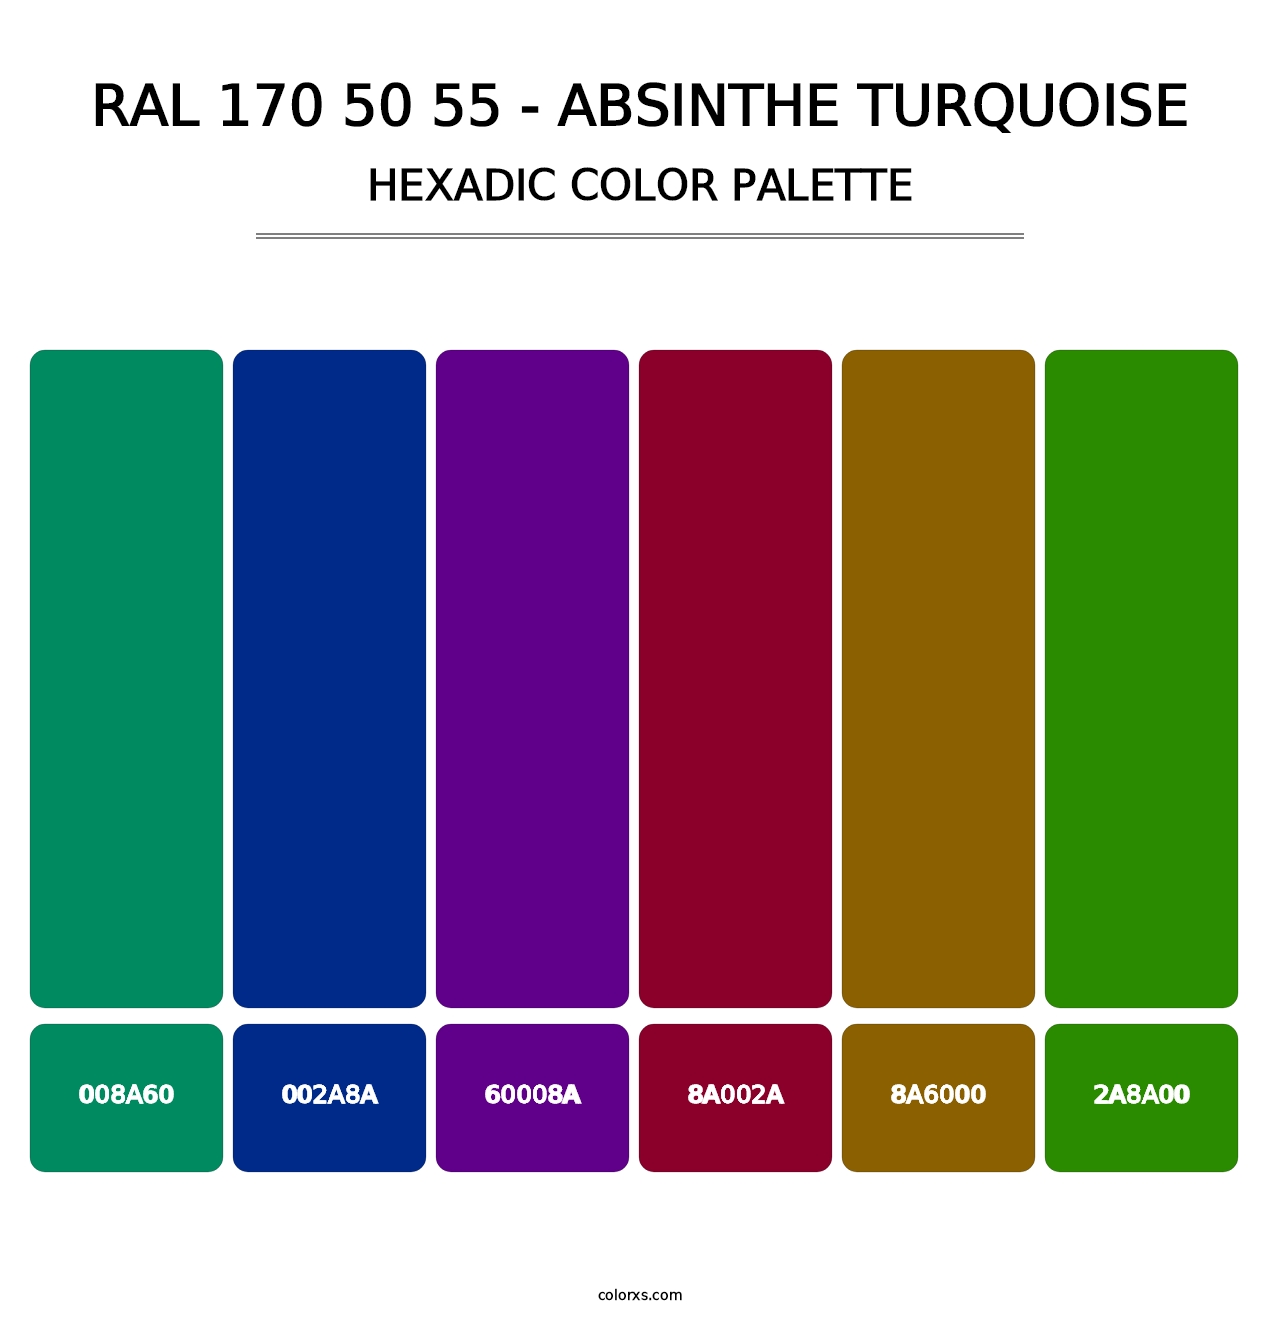 RAL 170 50 55 - Absinthe Turquoise - Hexadic Color Palette